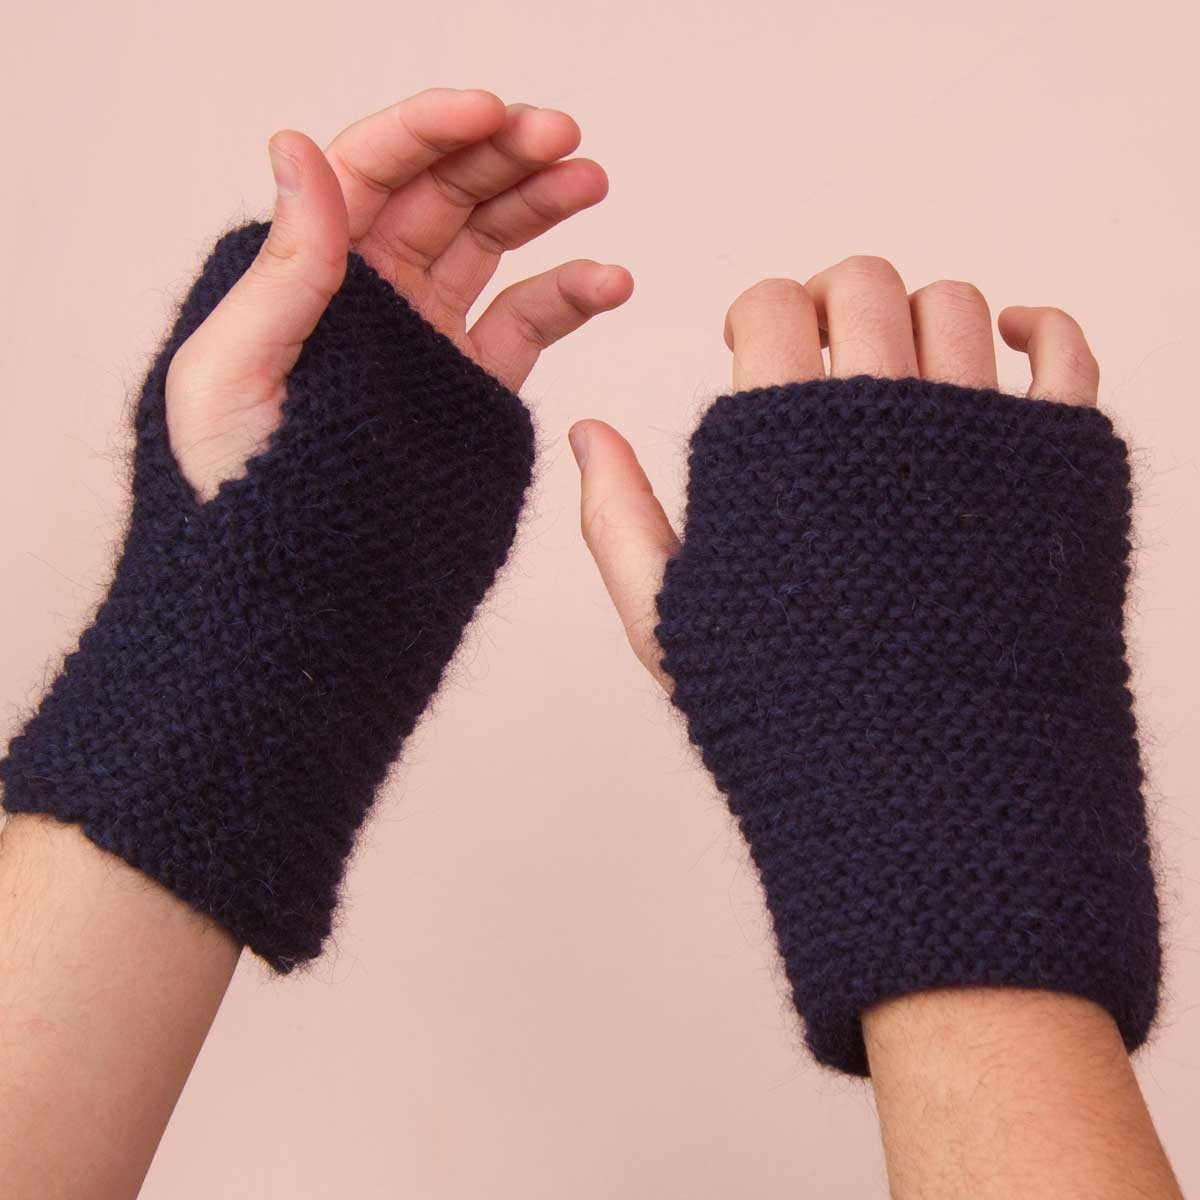 Copsis easy-to-knit Mittens